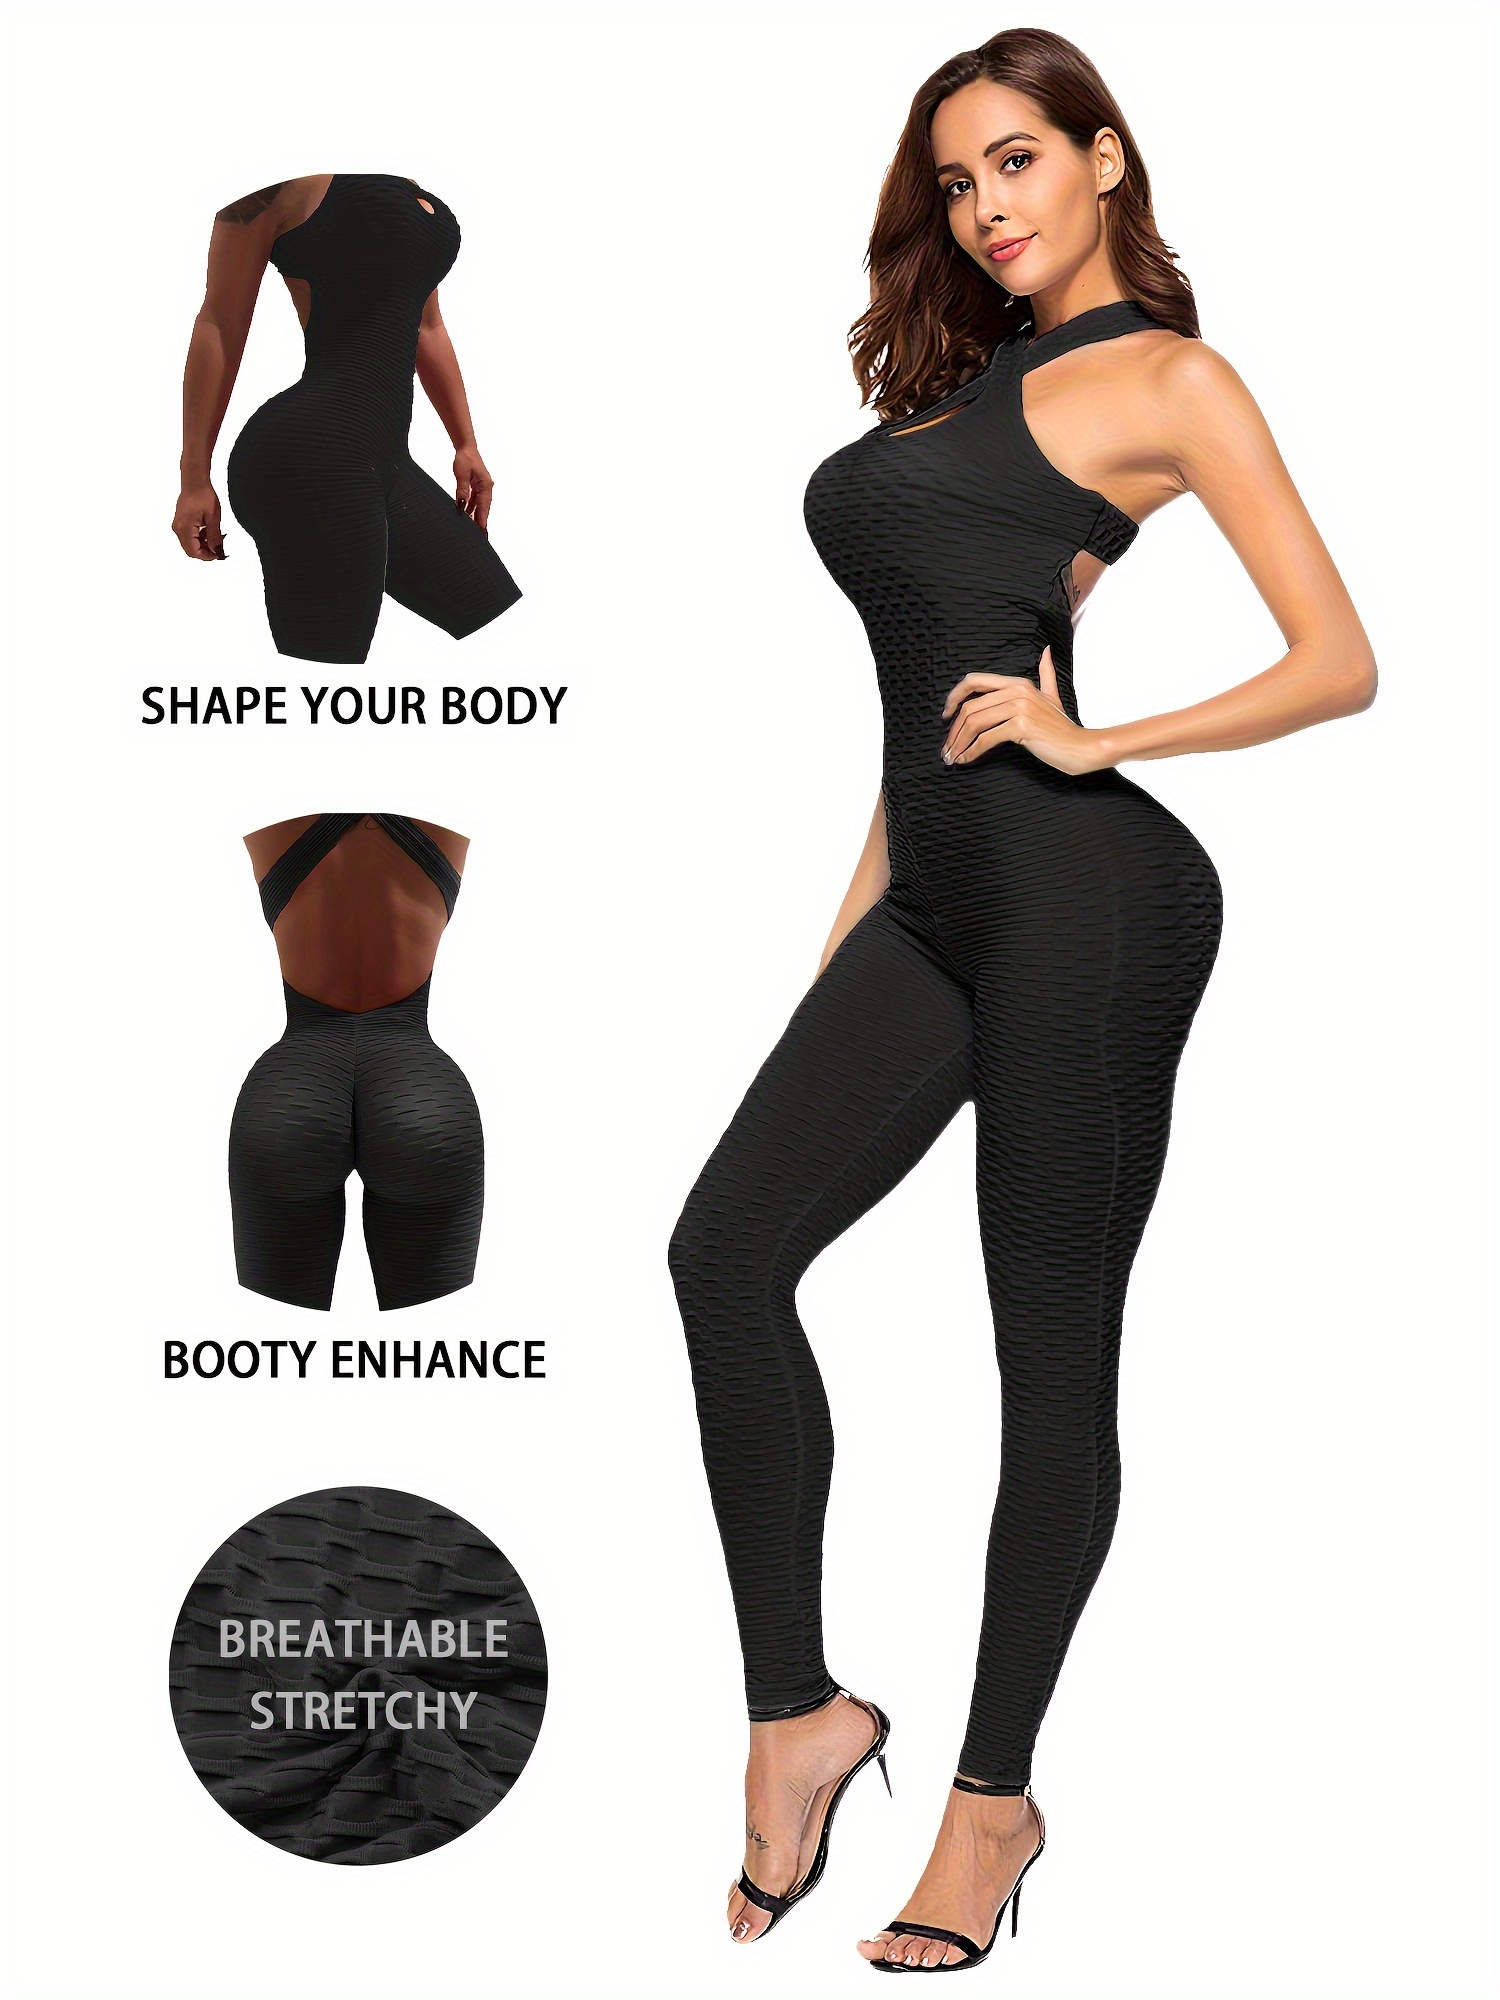 Women's Yoga Seamless Jumpsuits, Fitness Workout Gym Workout Jumpsuit,  Women's Activewear